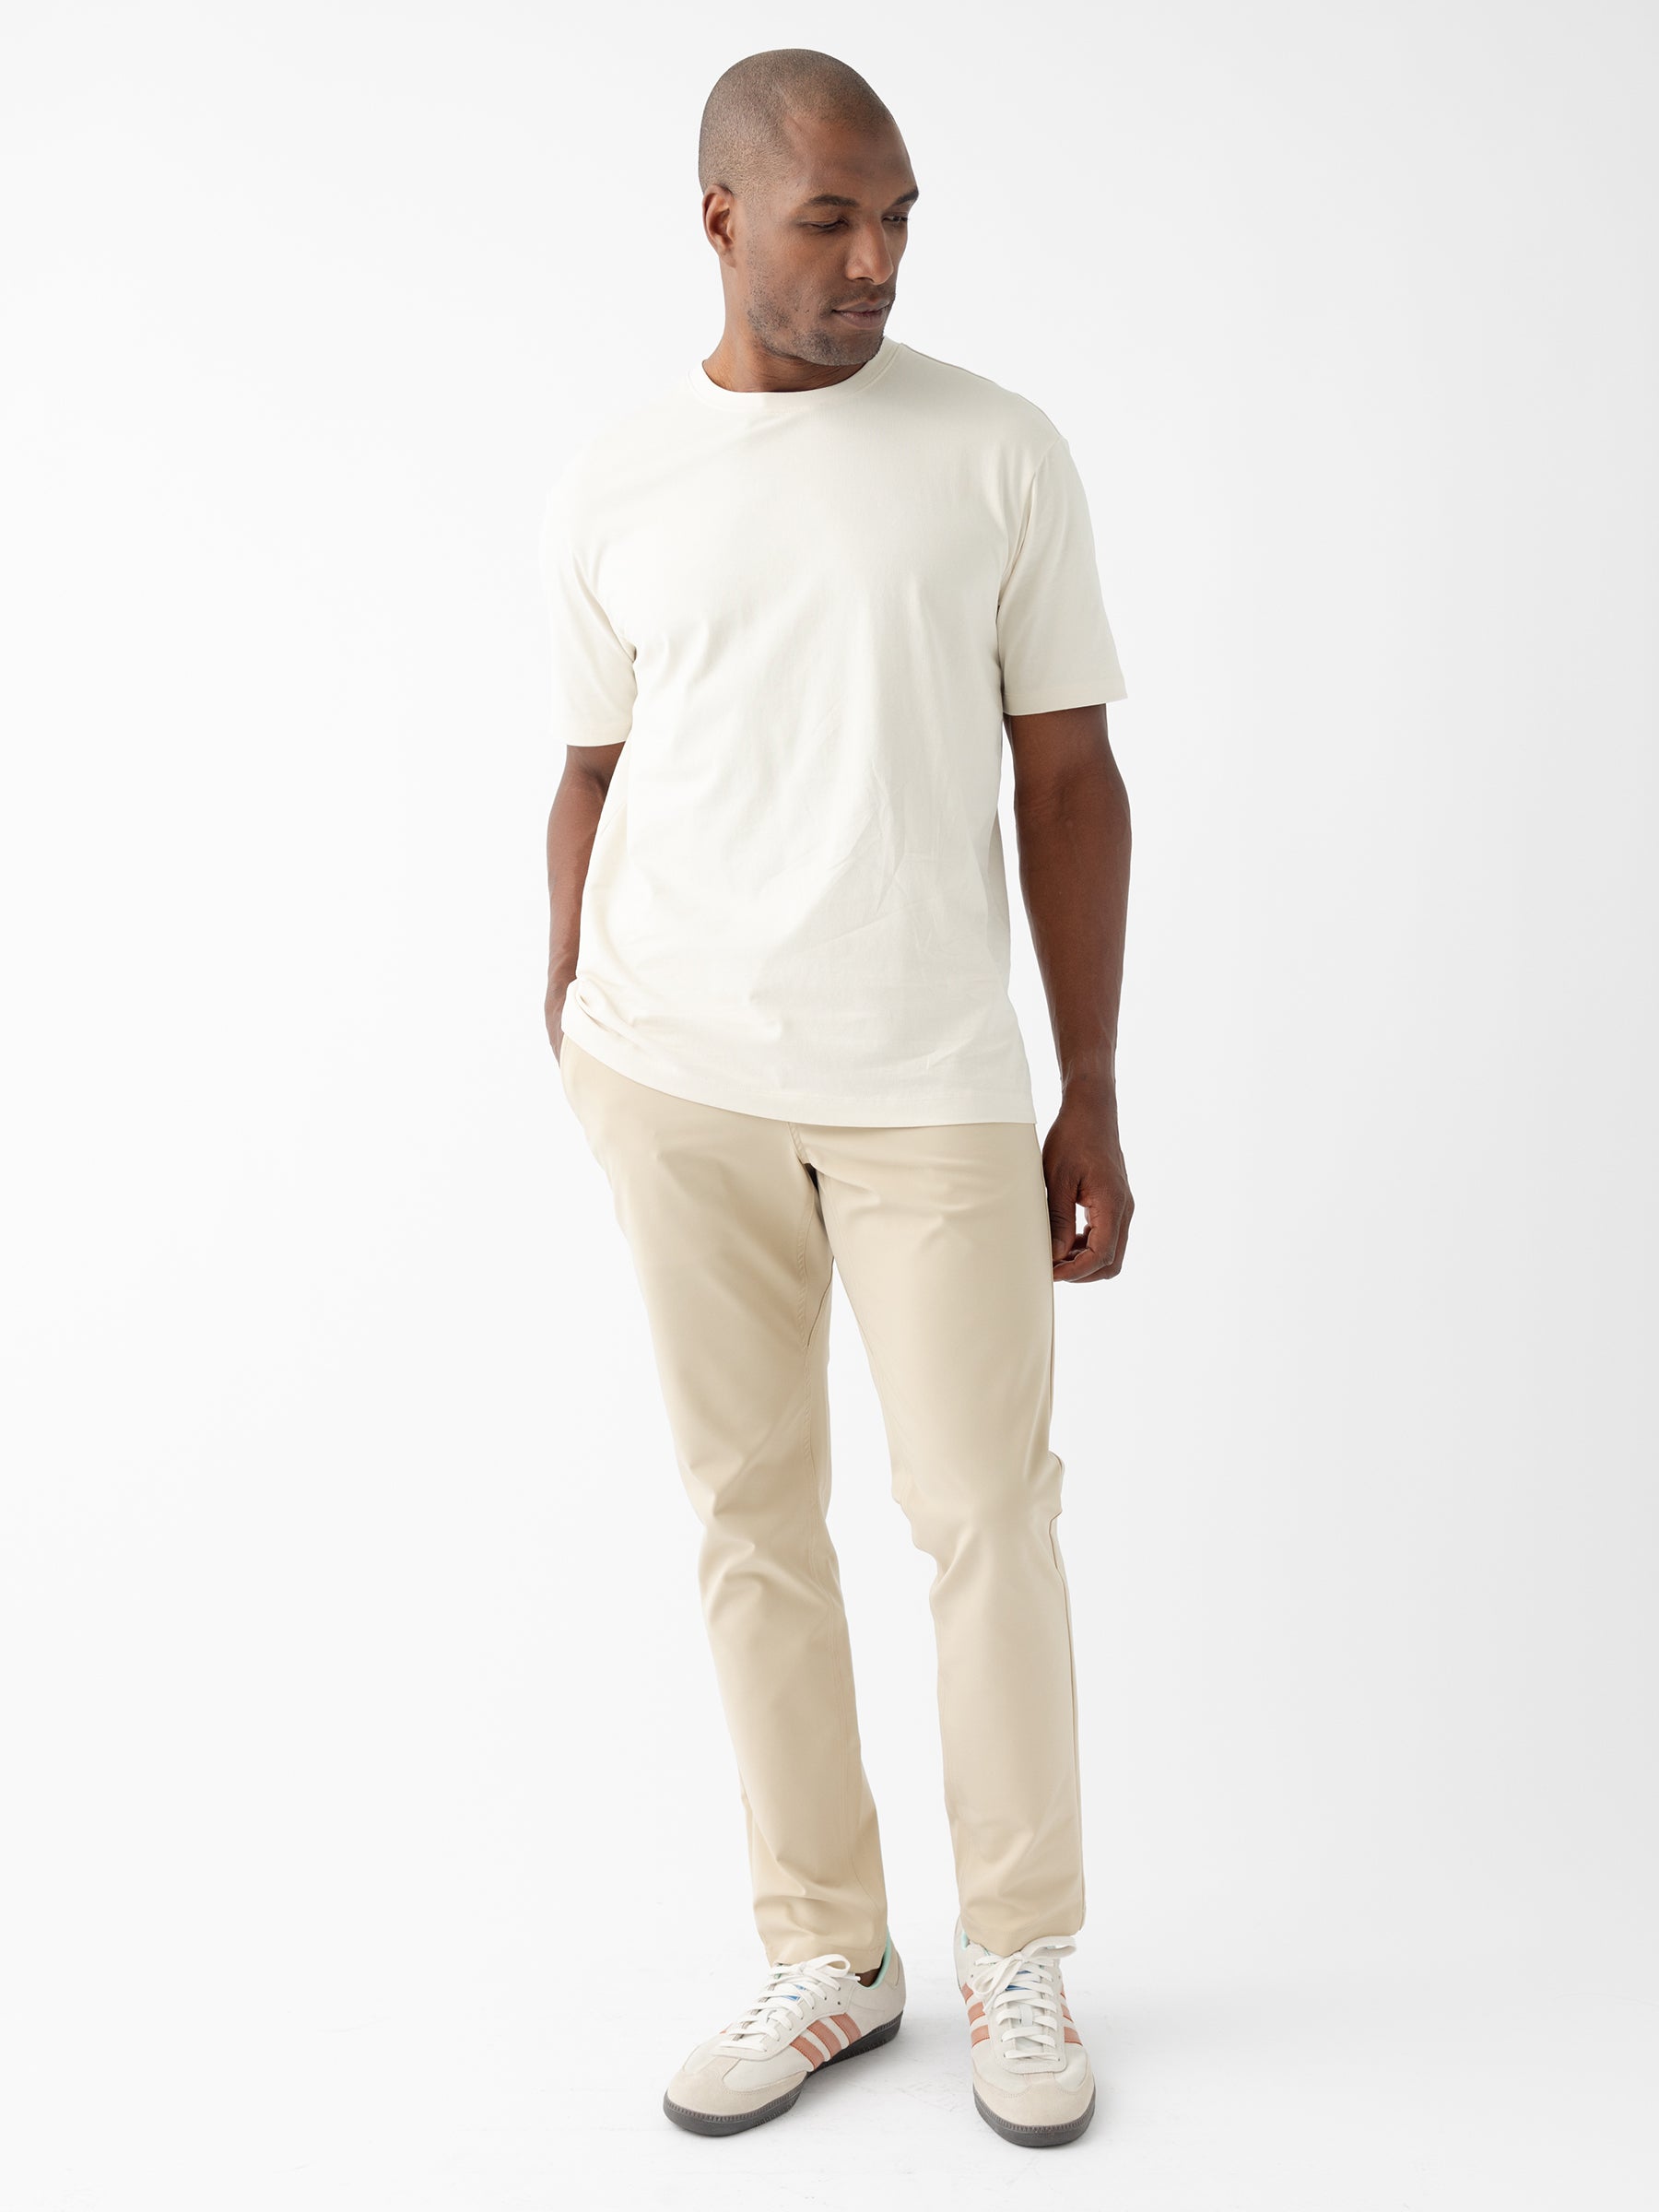 A person stands against a plain white background, looking down and to the side. They are wearing a casual cream-colored T-shirt, Cozy Earth's Men's Everywhere Pant 30L in beige, and white sneakers with gray and red detailing. The outfit is simple and monochromatic, emphasizing a clean and minimalistic style. |Color:Khaki